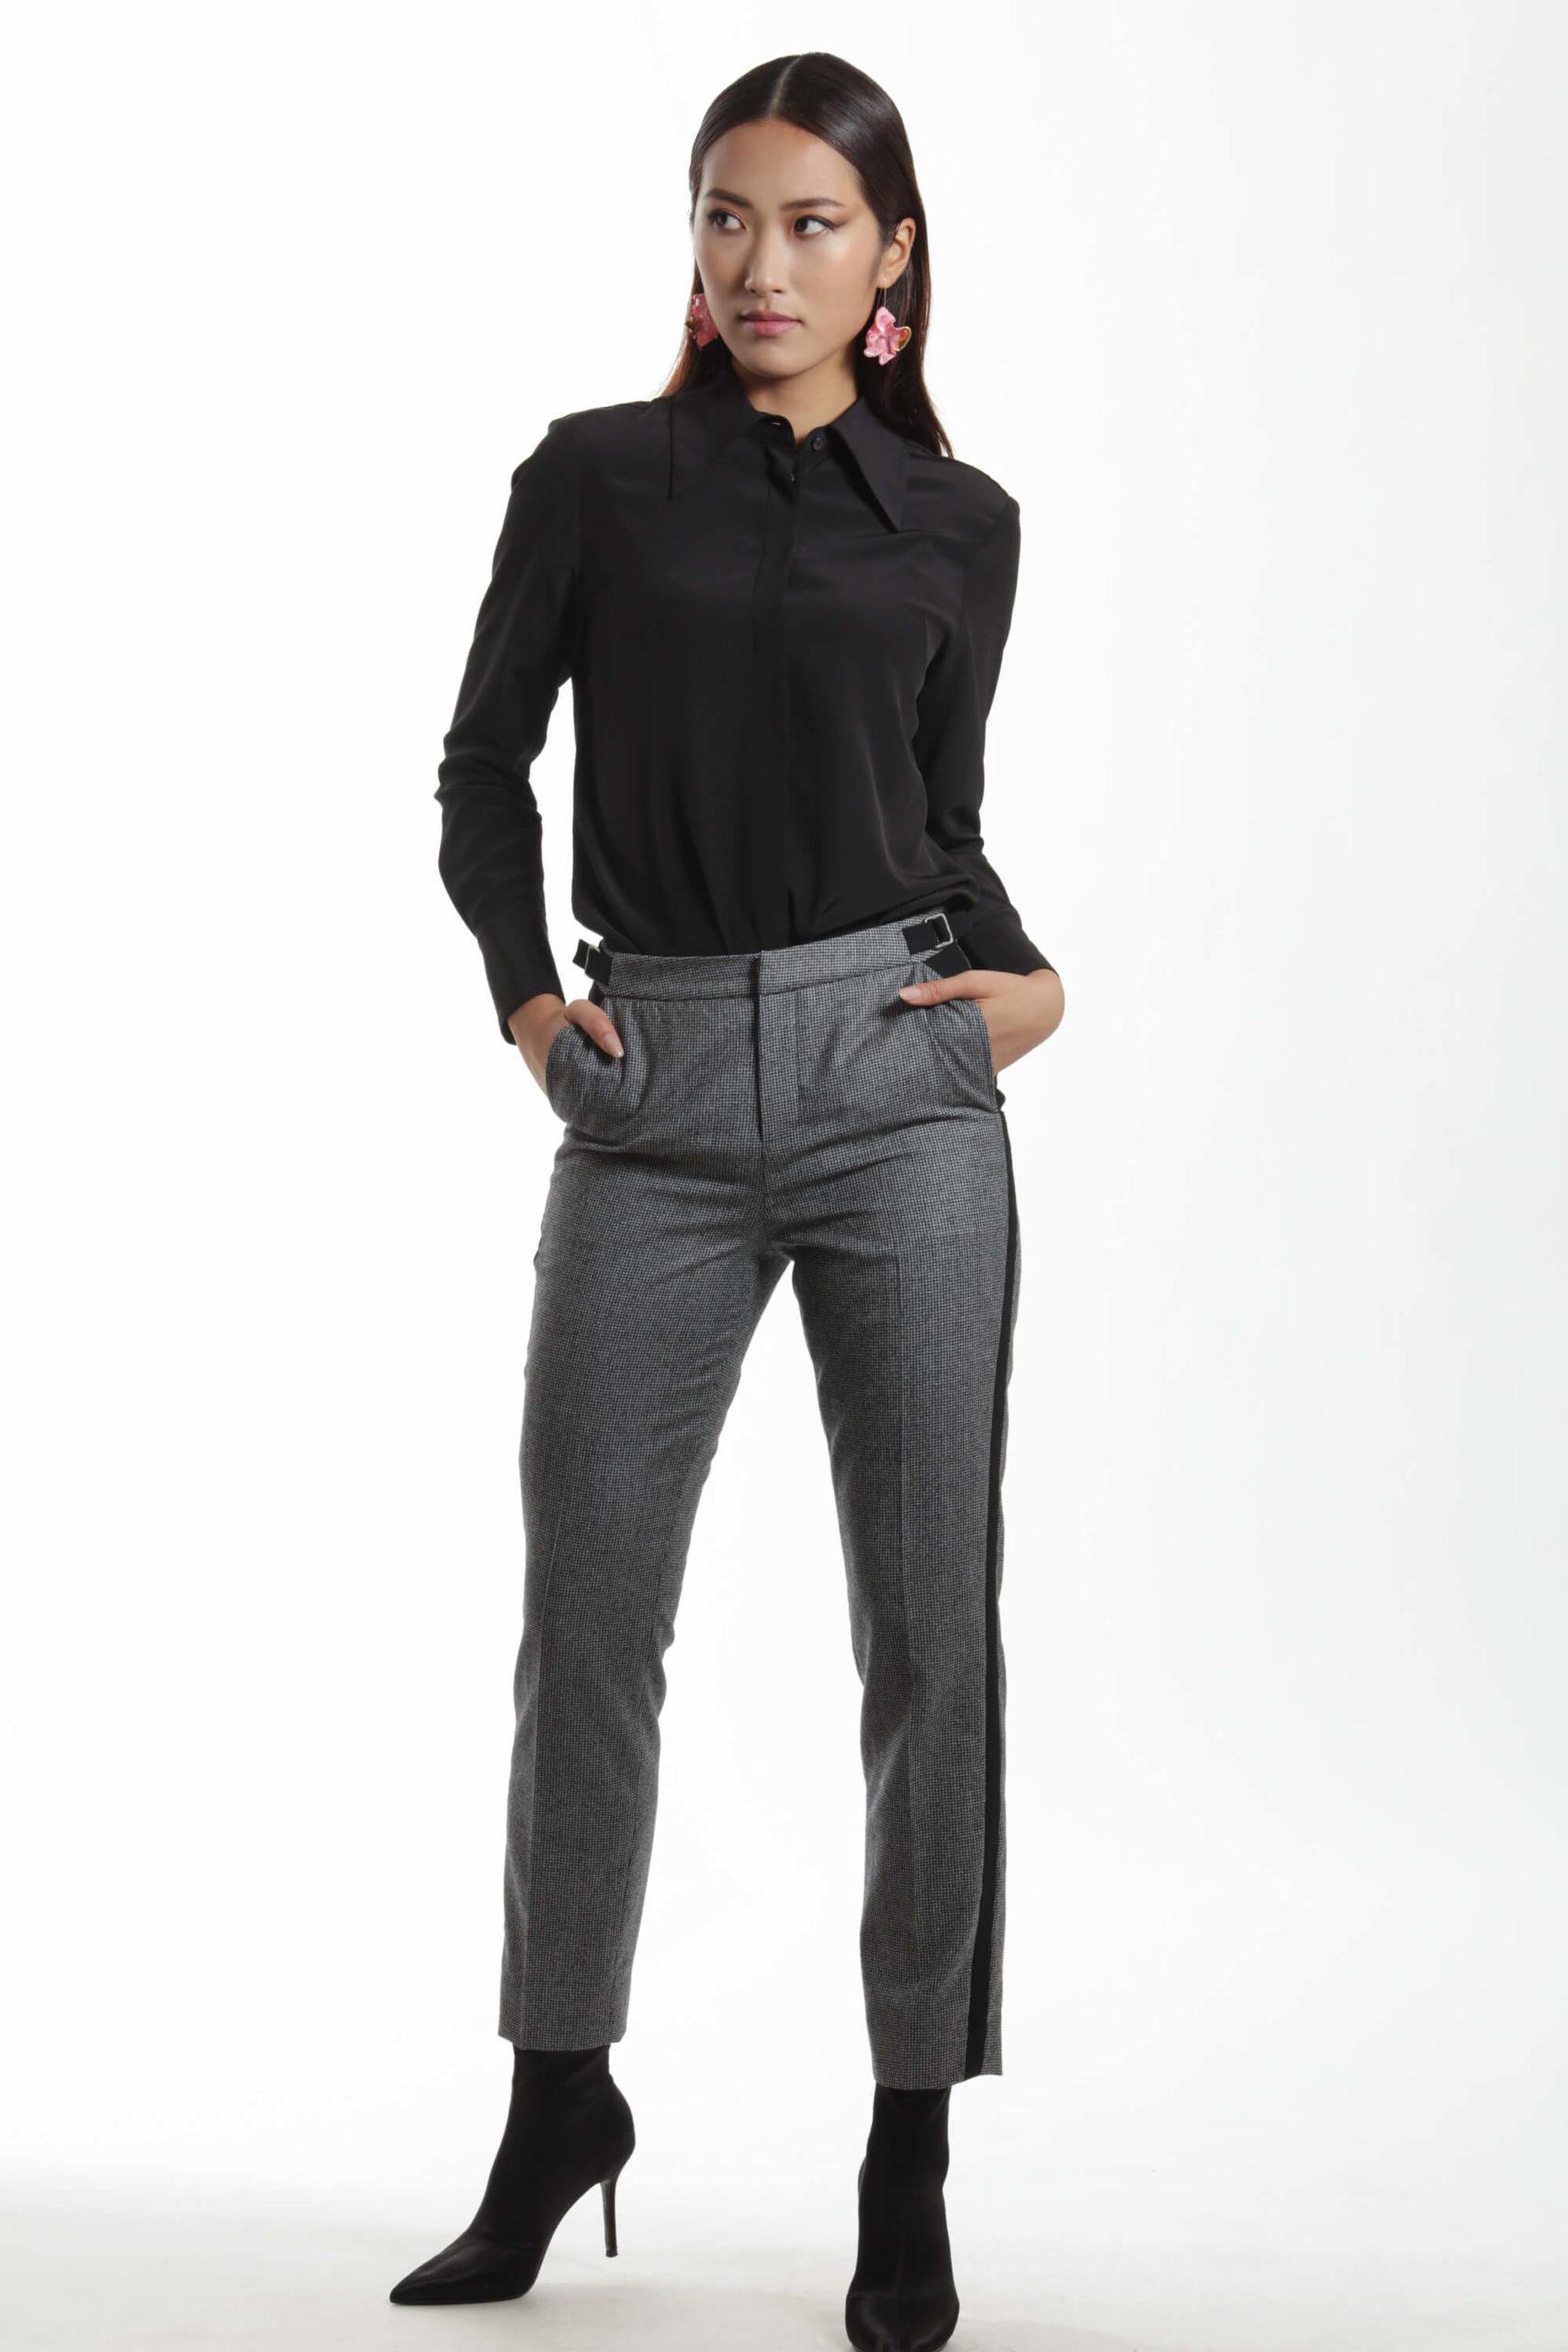 Lyon – High-waisted wool trousers with side bars in black and white houndstooth